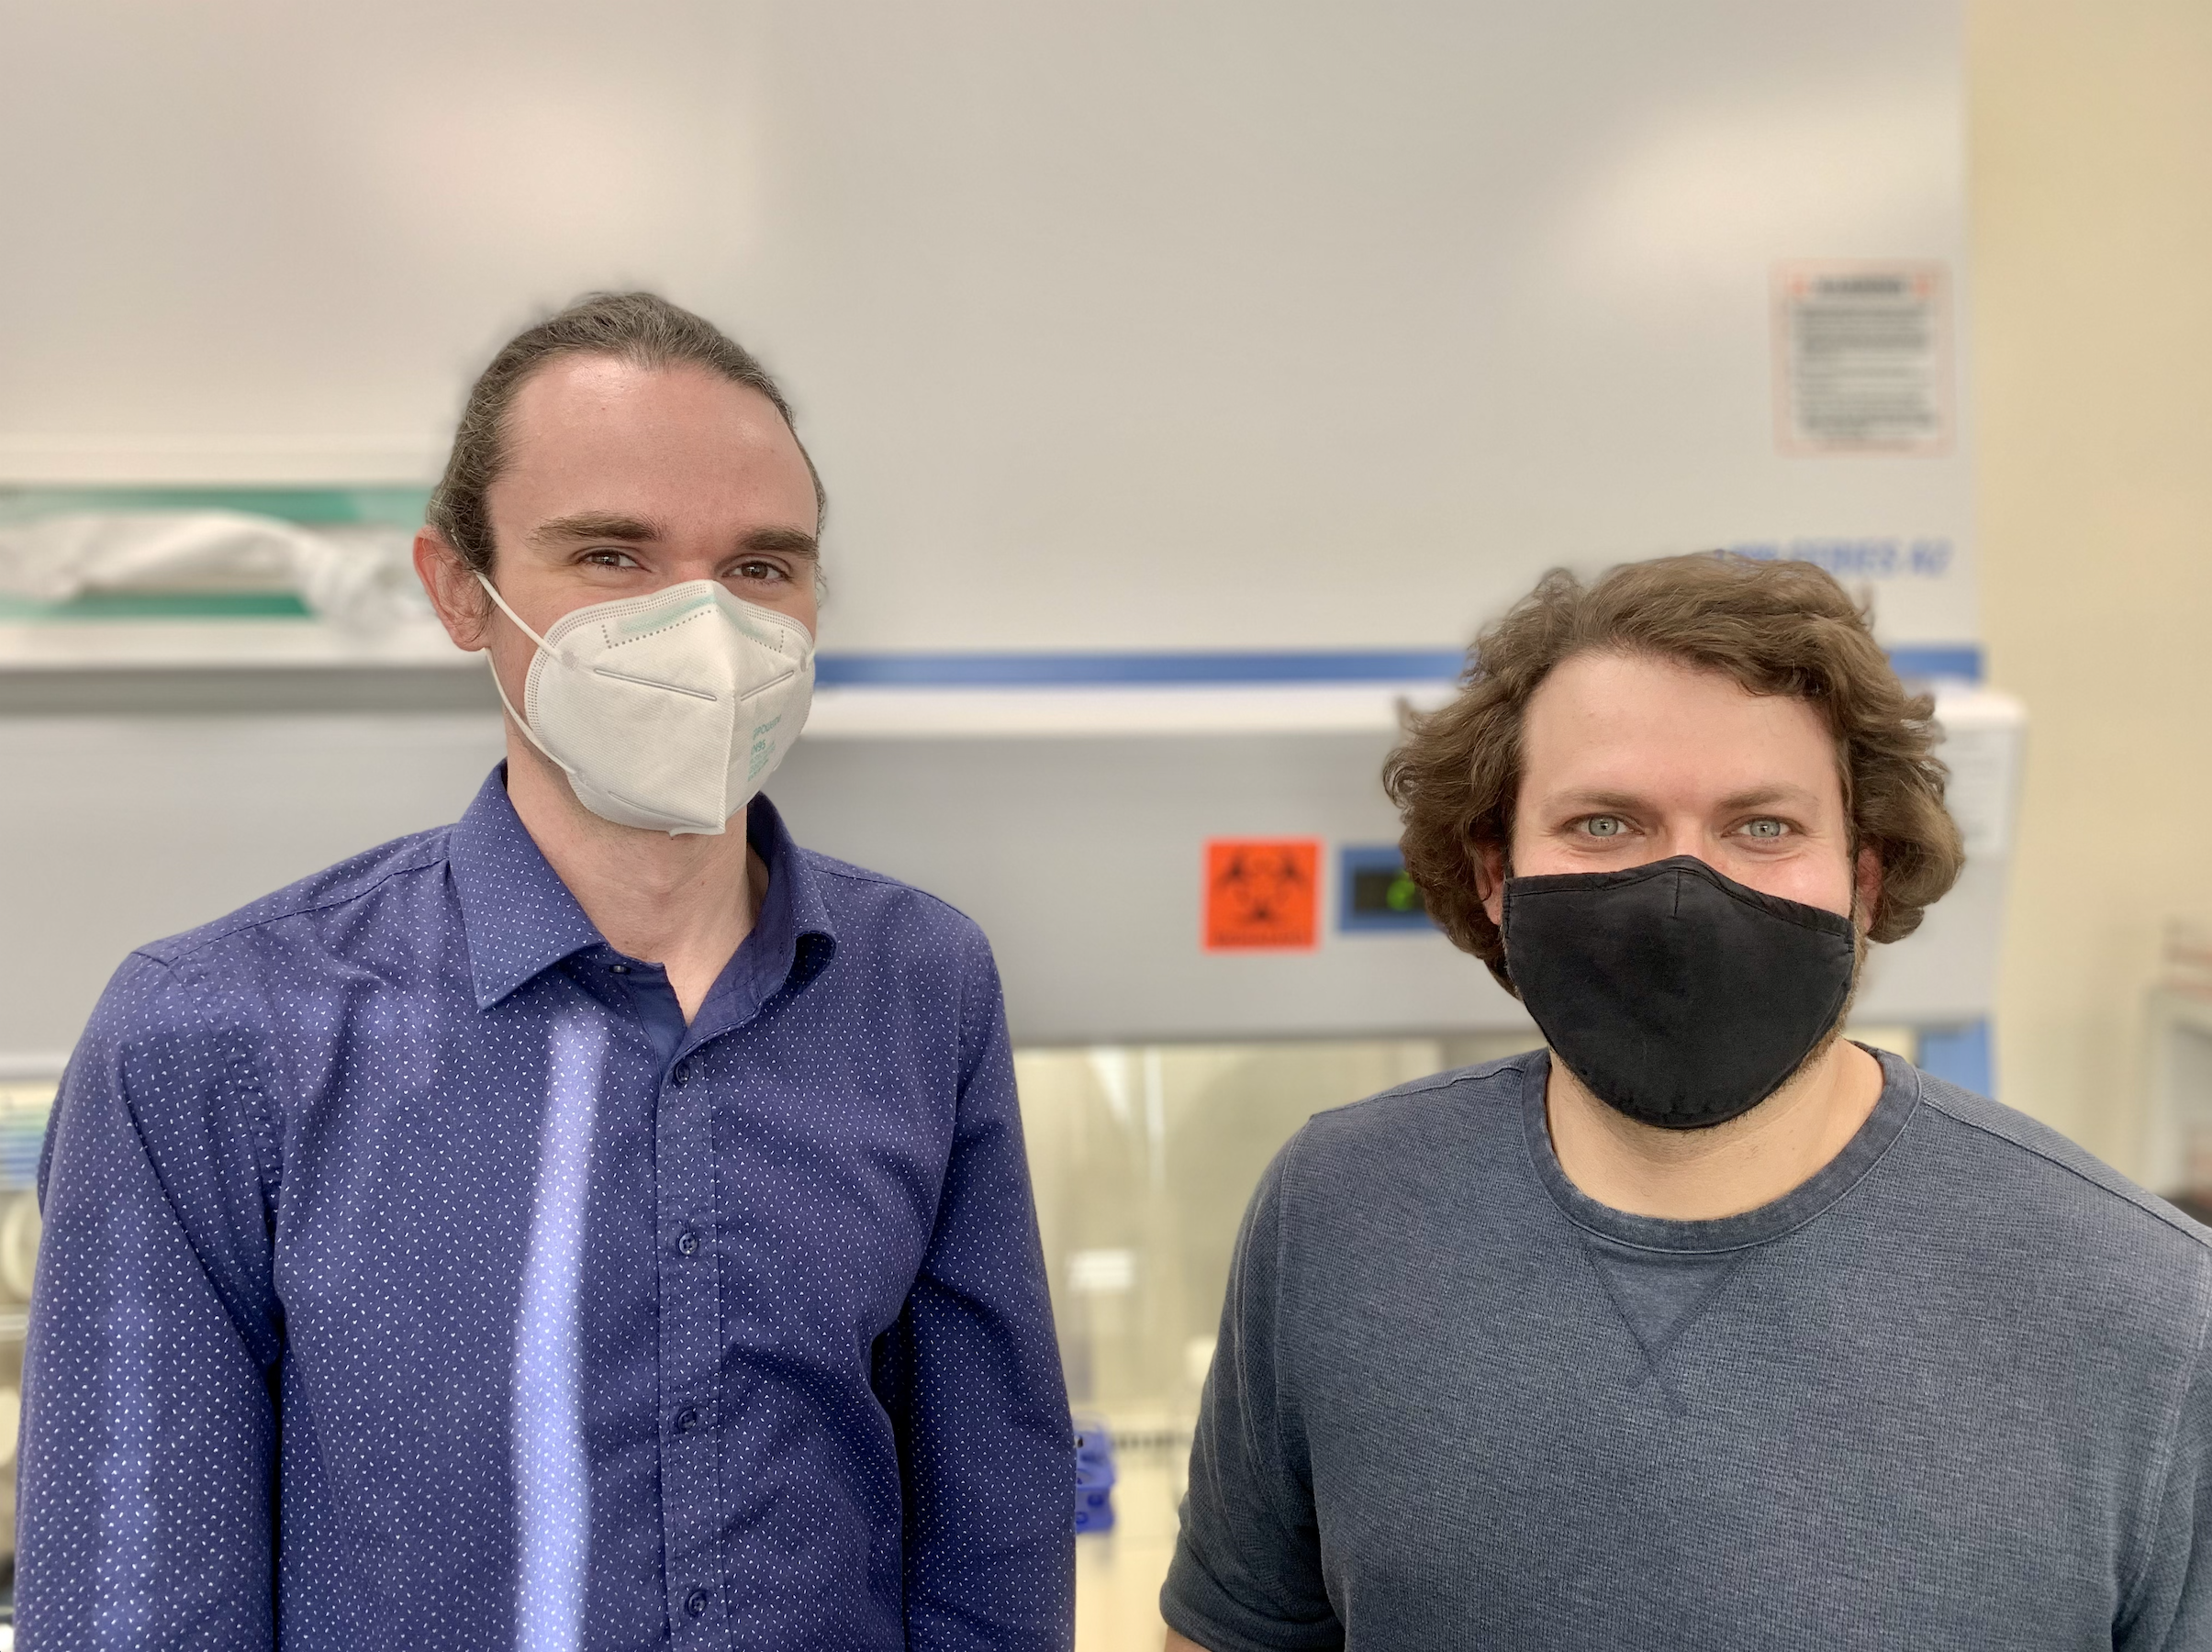 resistanceBio CEO Nick Goldner and COO Chris Bulow wearing masks in the lab